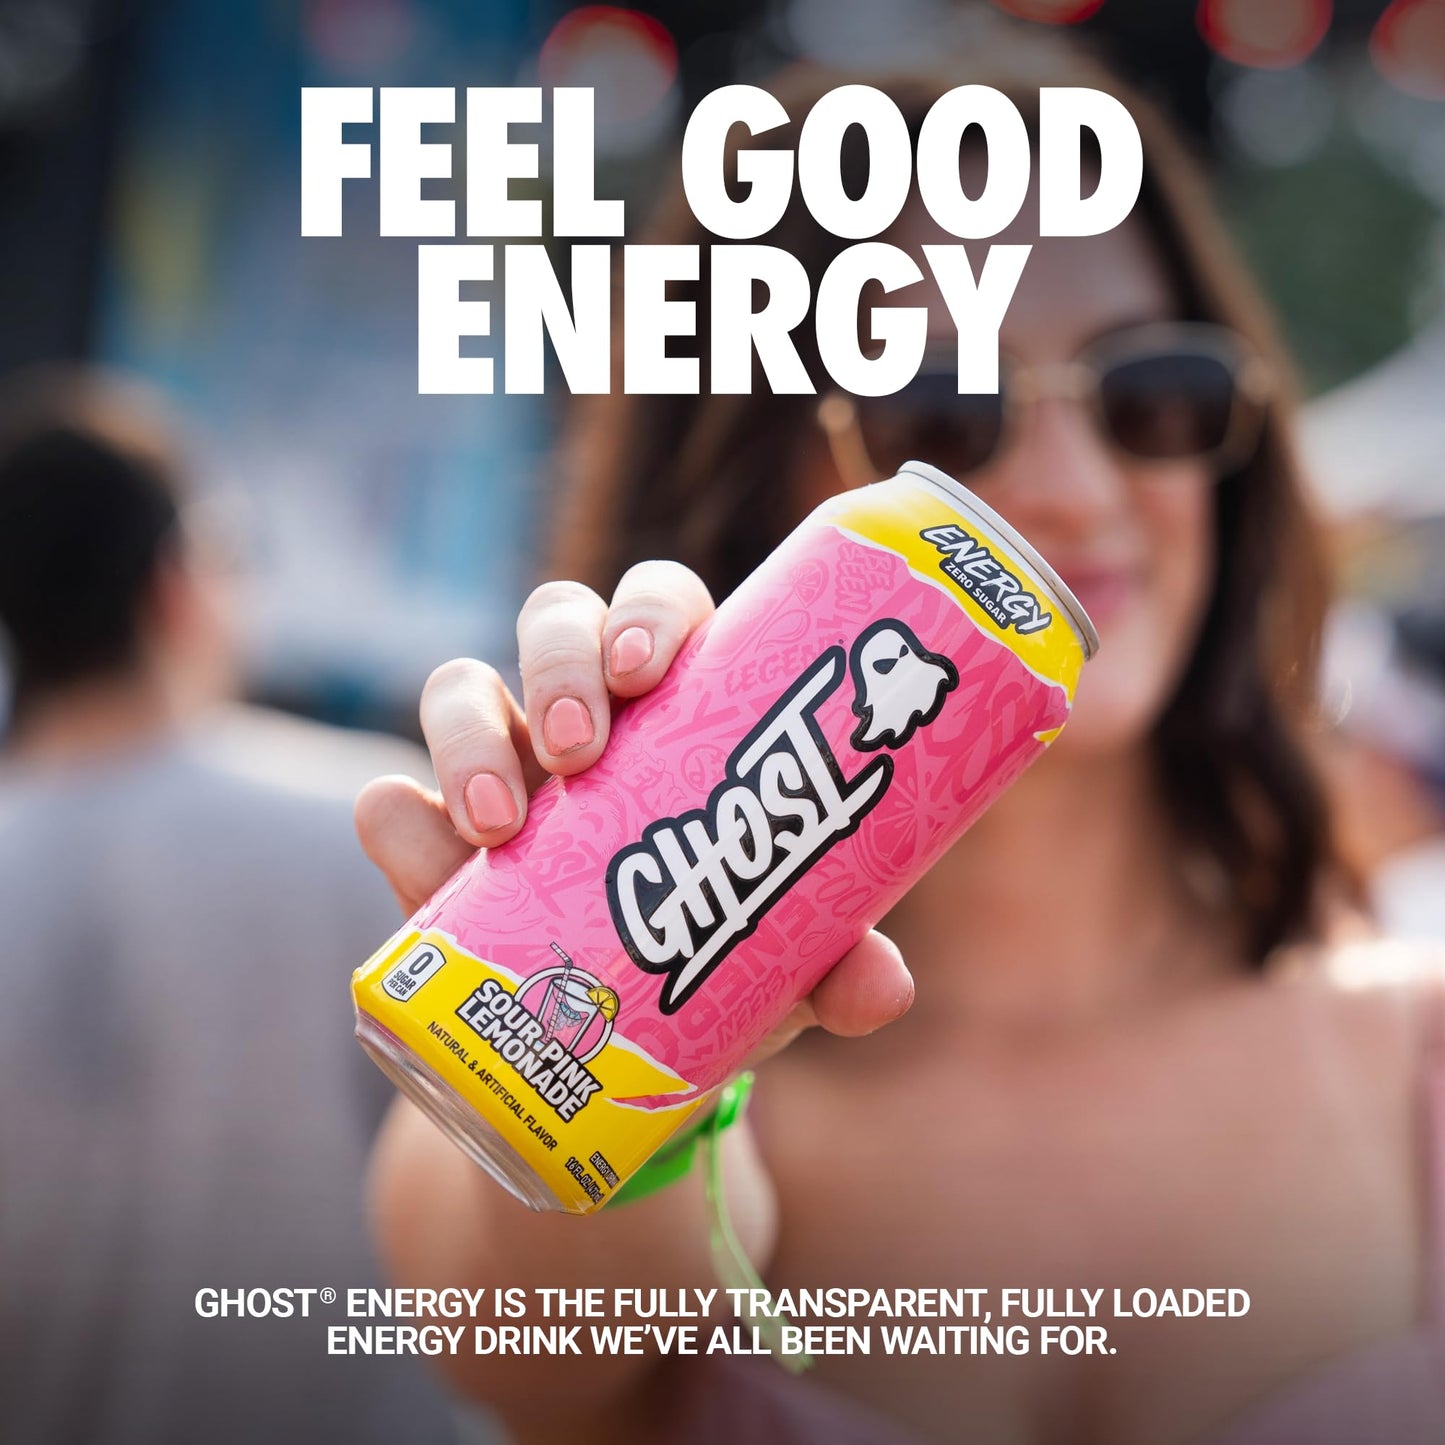 GHOST Energy Drink - 12-Pack, Sour Pink Lemonade, 16oz Cans - Energy & Focus & No Artificial Colors - 200mg of Natural Caffeine, L-Carnitine & Taurine - Gluten-Free & Vegan